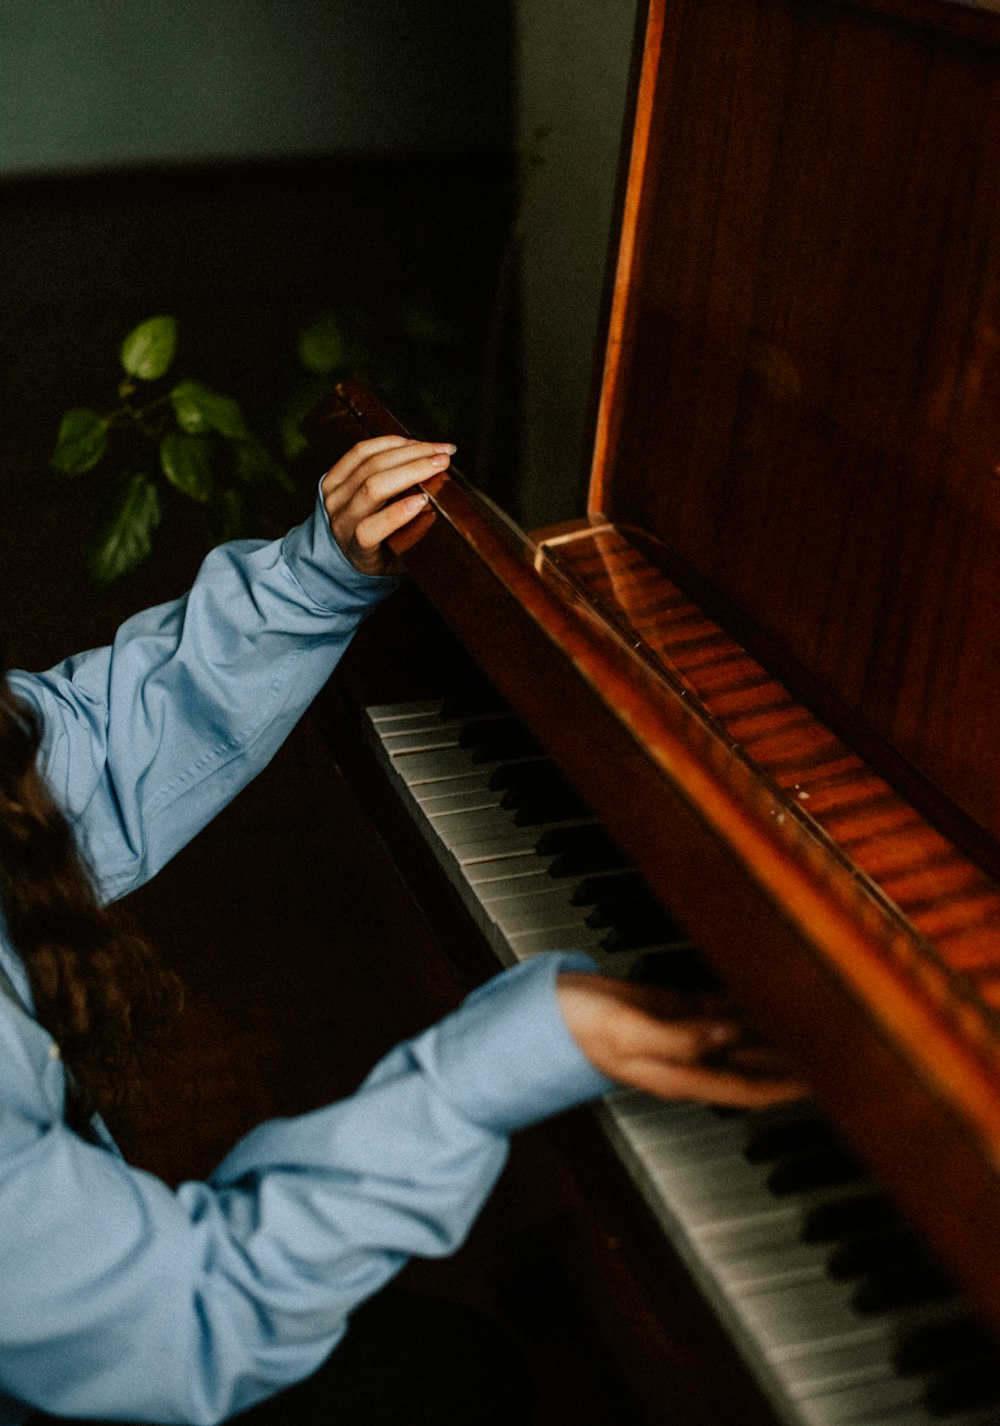 a woman in a blue shirt is playing a piano